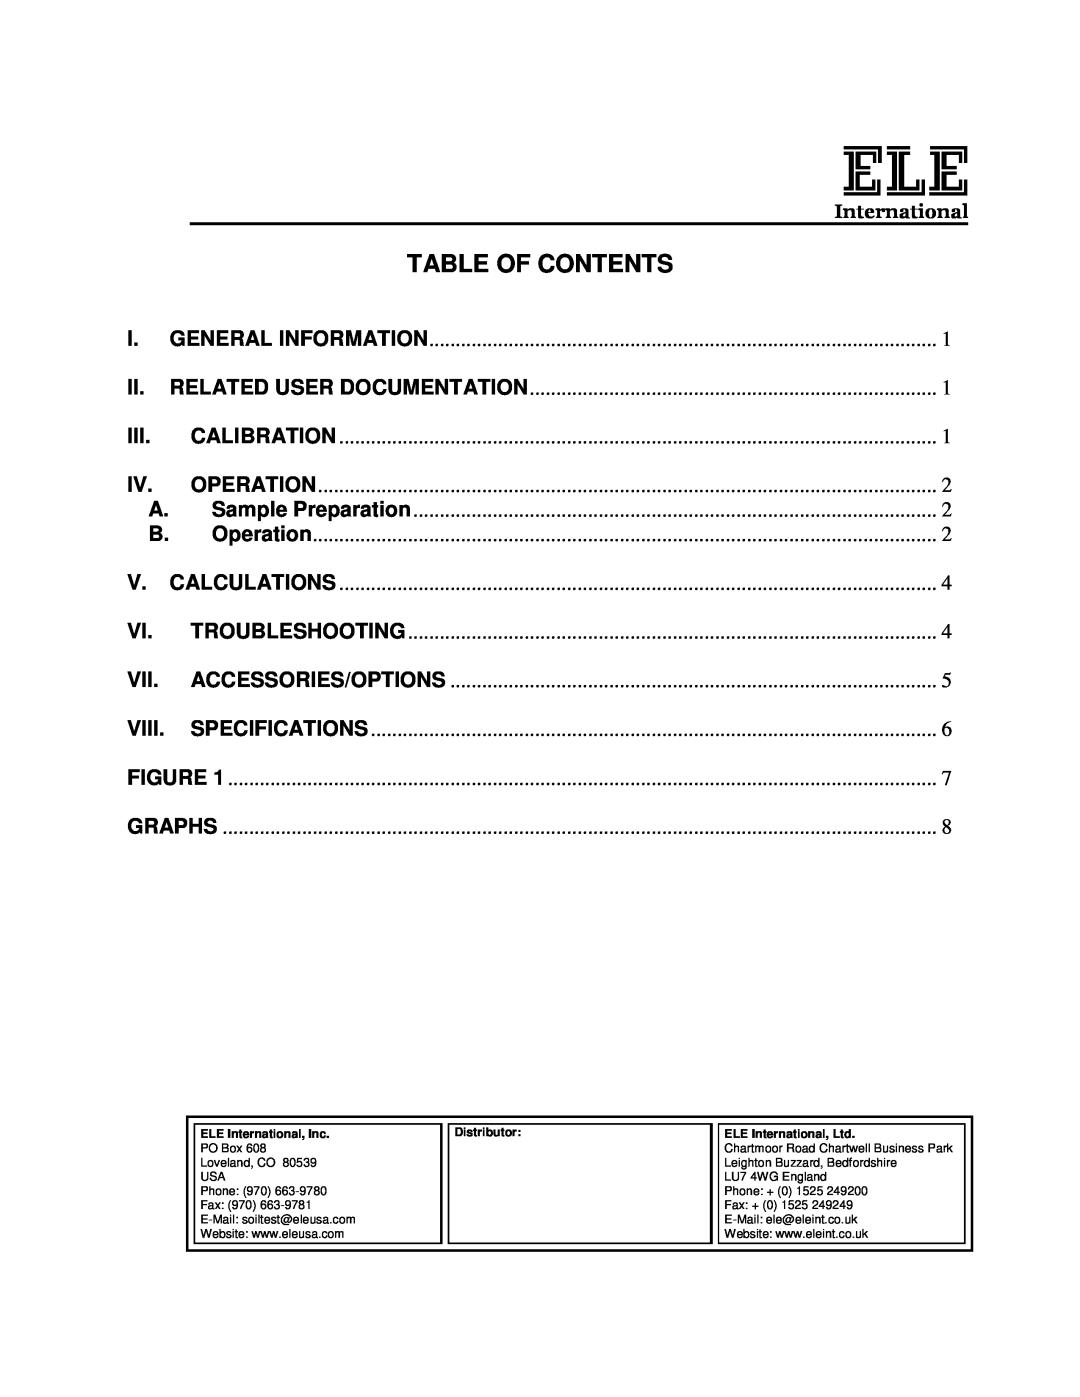 Ele 45-9300 manual Viii, Table Of Contents 